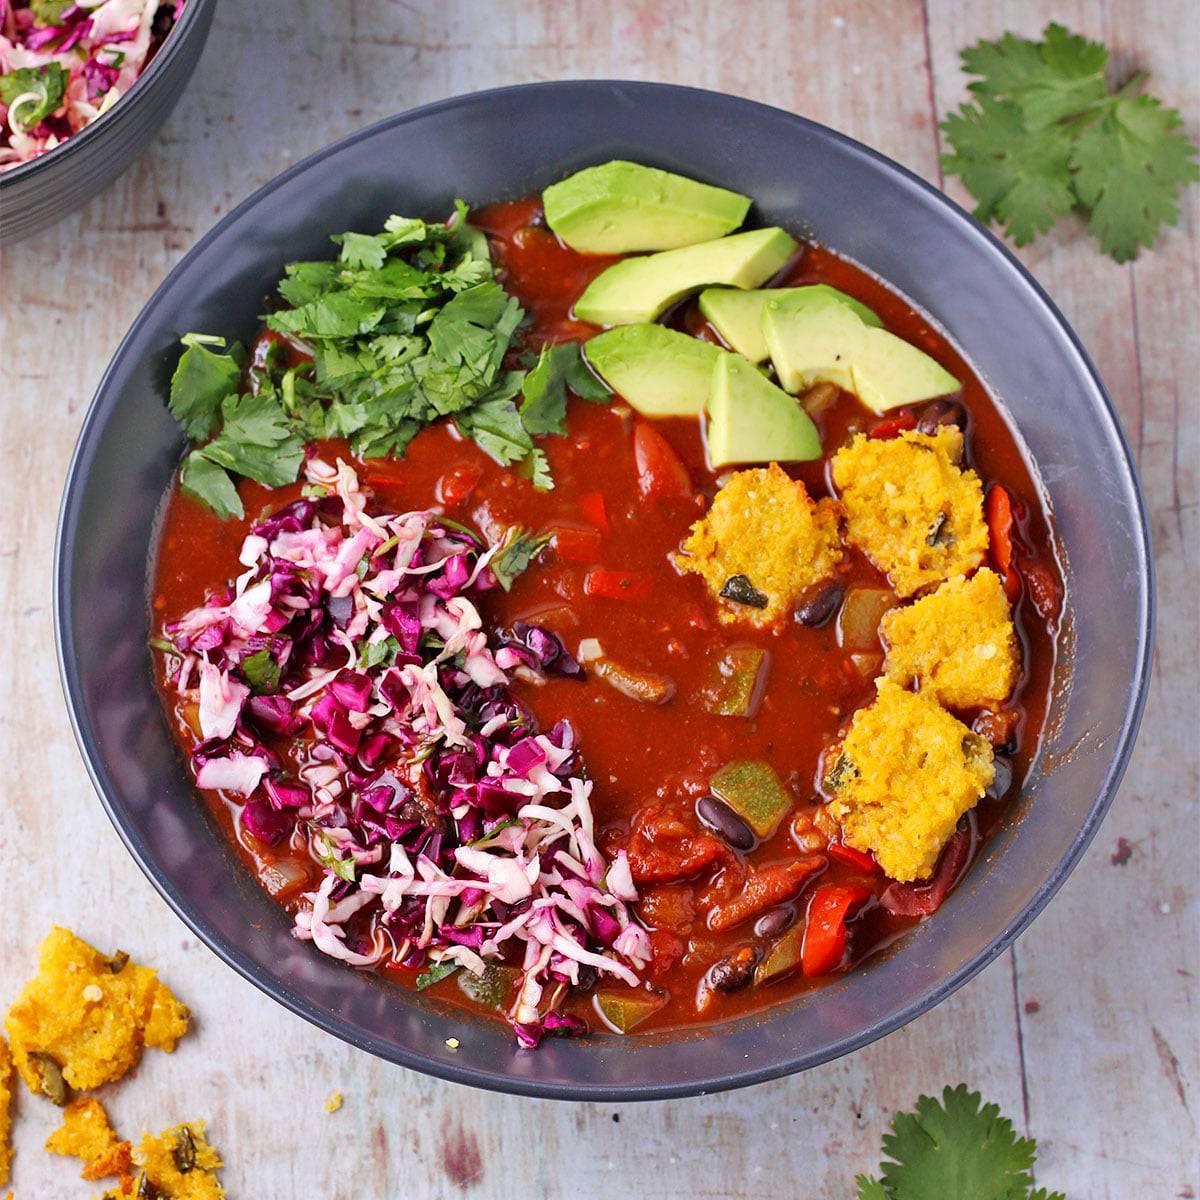 Overhead shot of bowl of black bean chili with cocoa powder topped with jalapeno polenta squares, cabbage slaw, chopped cilantro and avocado cubes